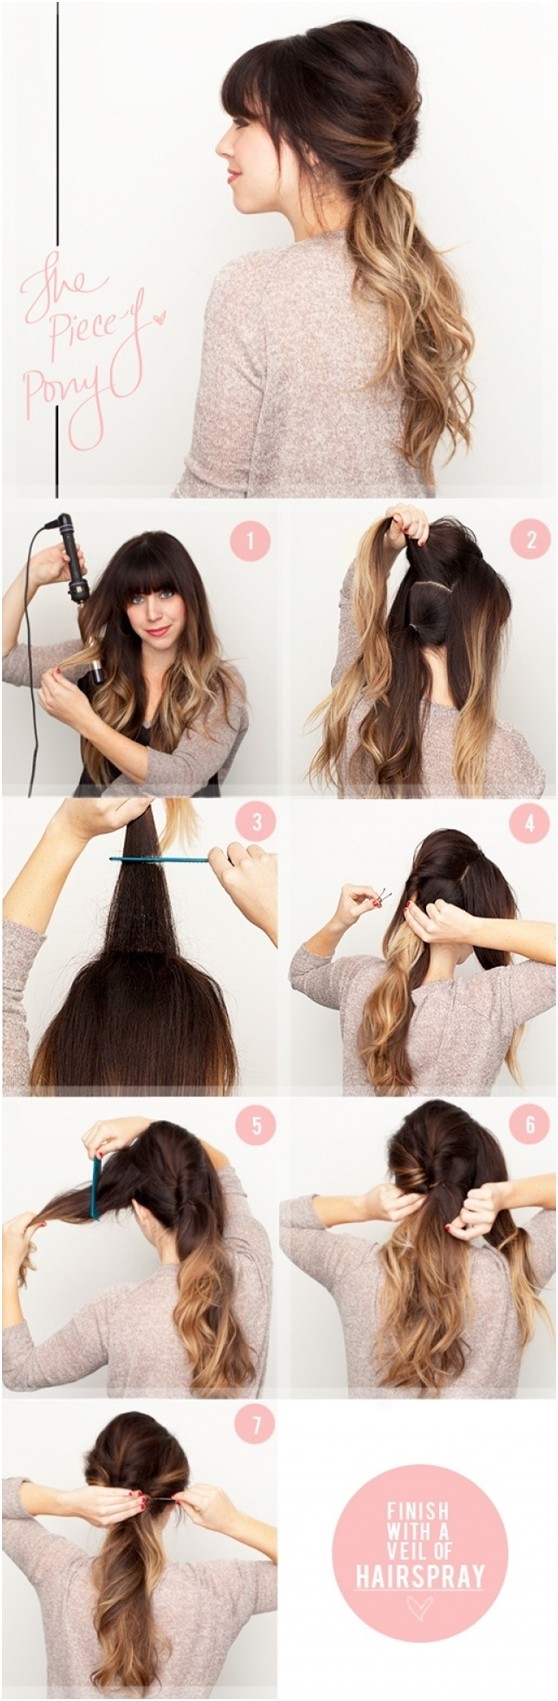 Simple ponytail hairstyle for ombre hair